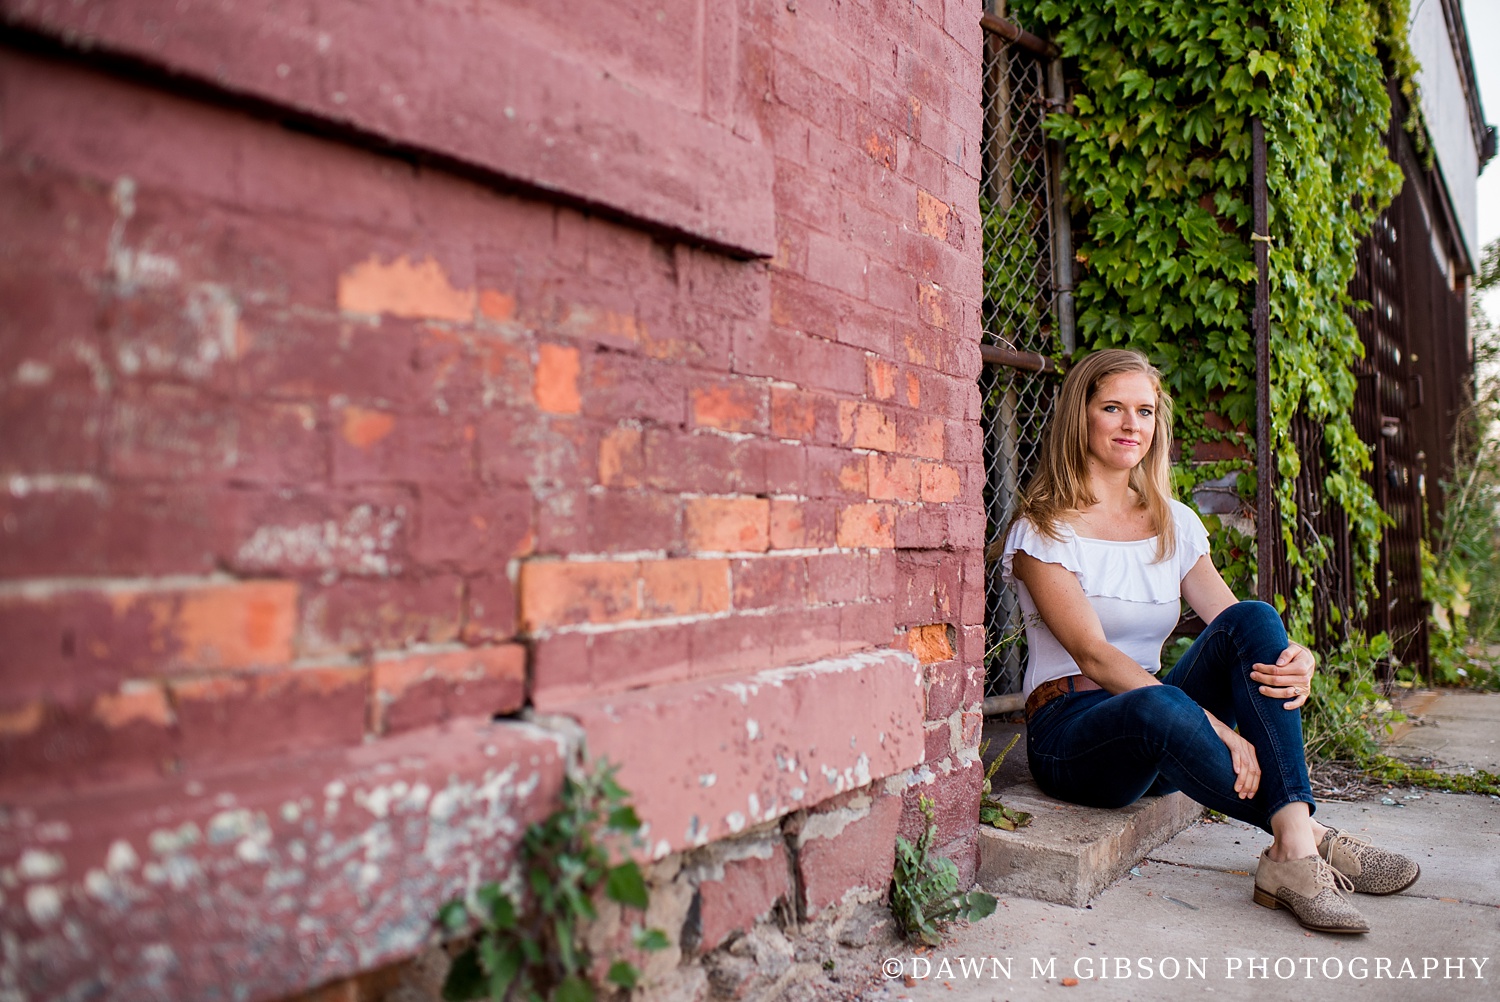 Casey Kelly Portraits | Photos by Dawn M Gibson Photography